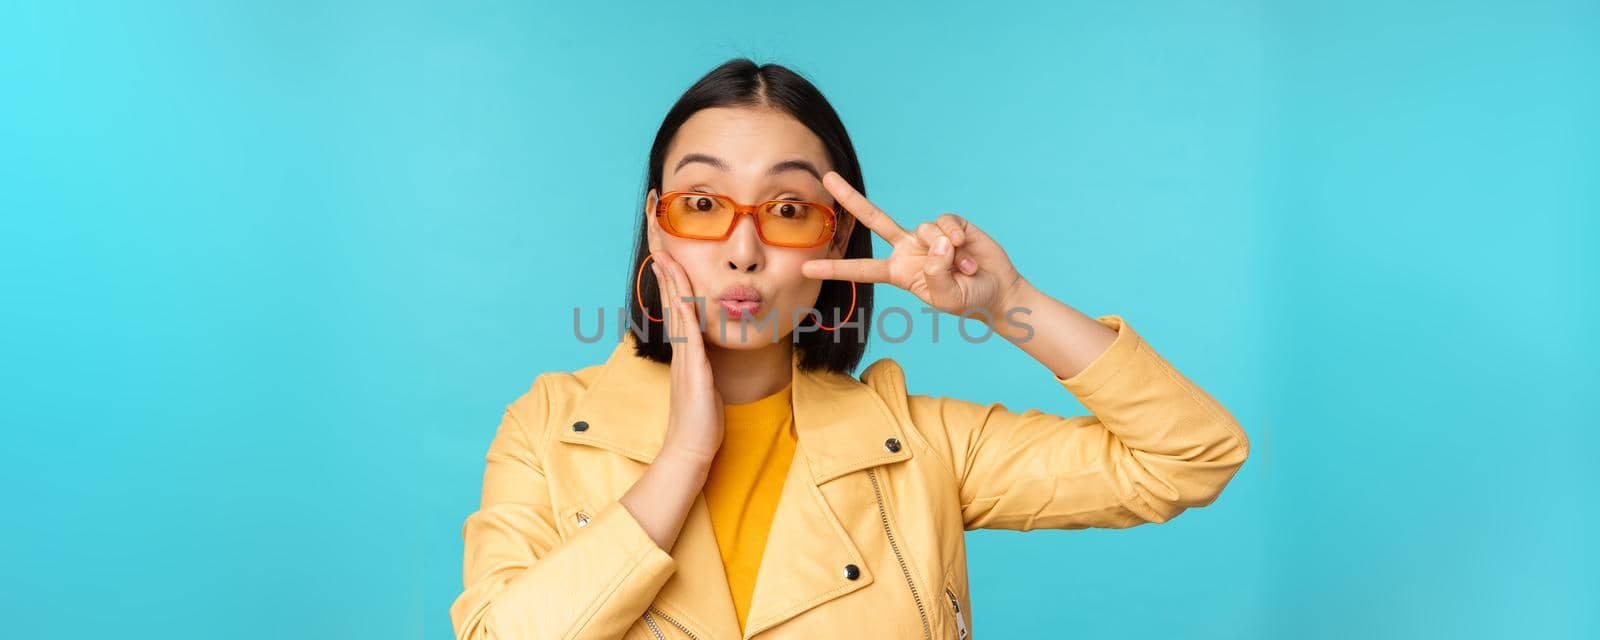 Portrait of attractive korean woman in sunglasses, showing peace v-sign near eyes, pucker lips, kissing gesture, standing over blue background.